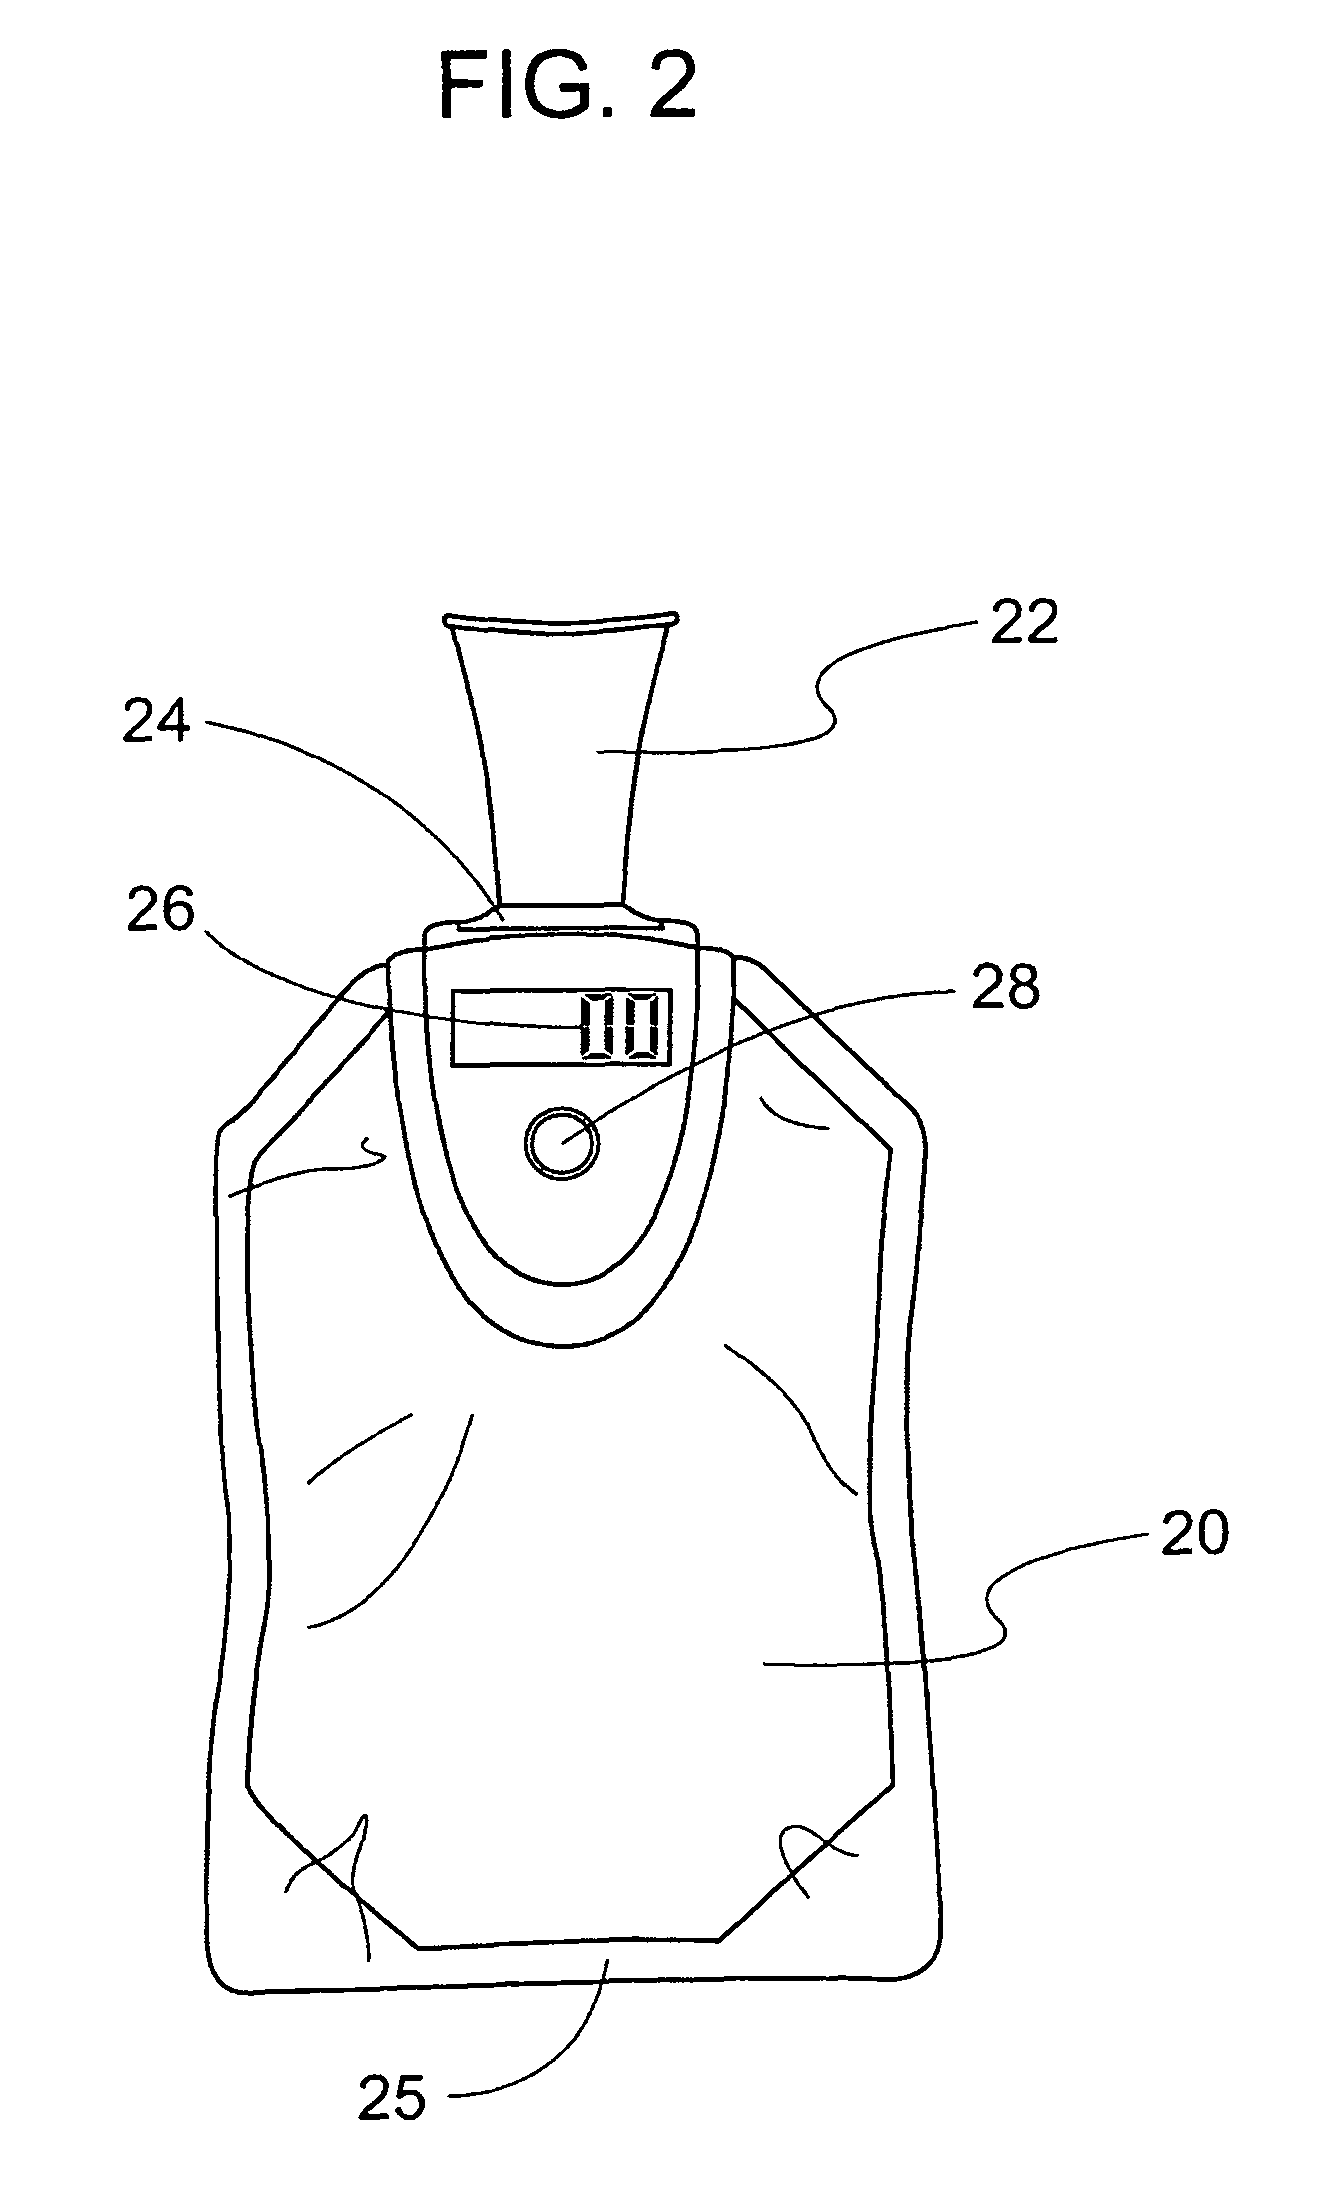 Method and apparatus for analyzing acetone in breath